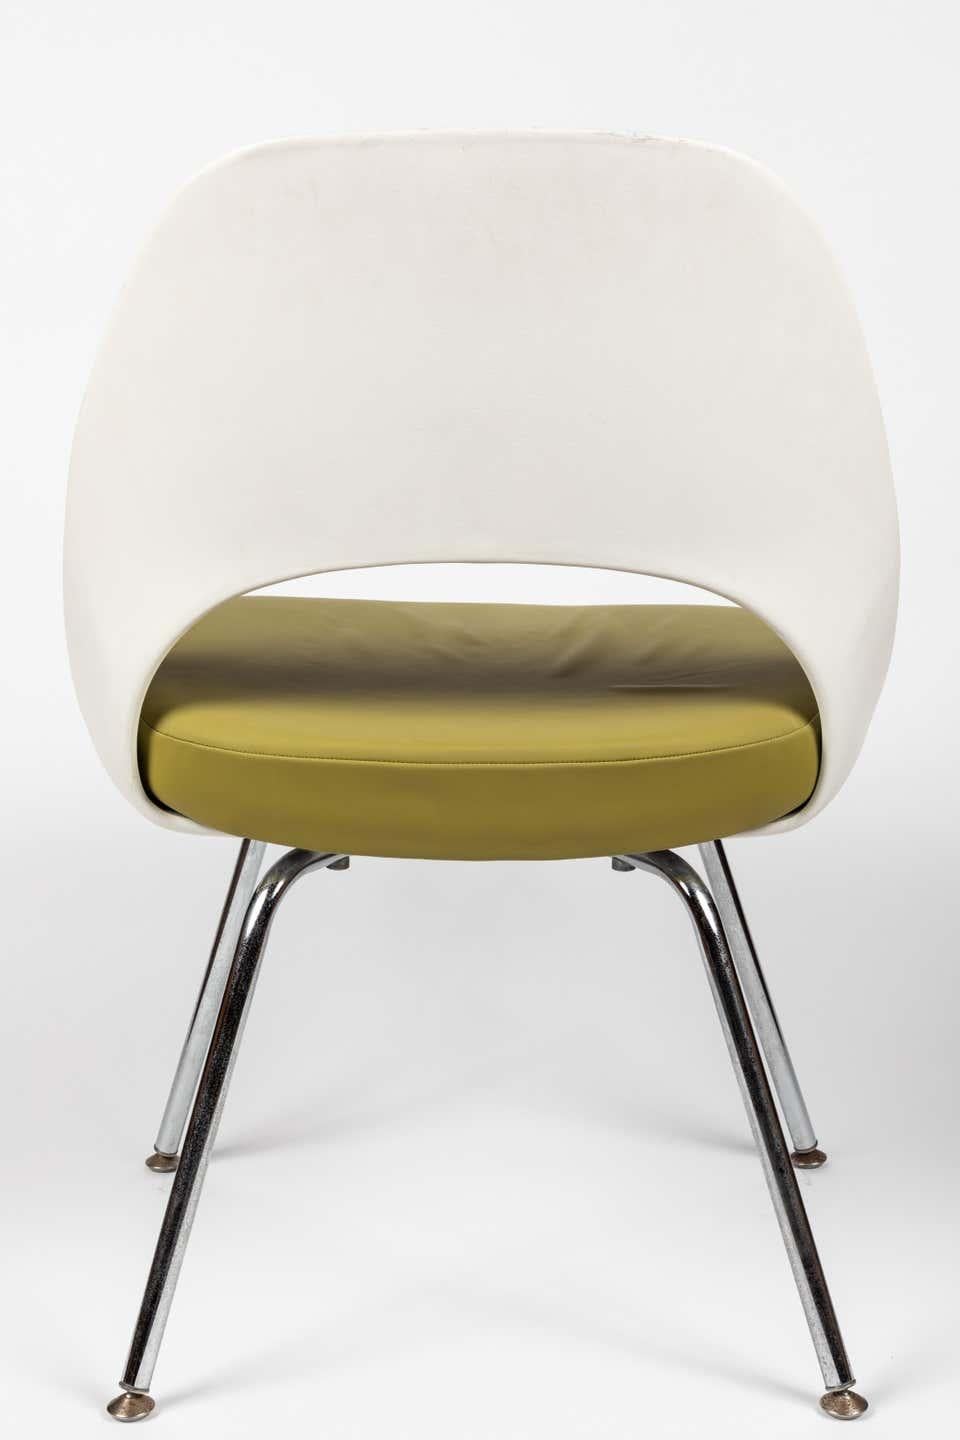 Saarinen Executive Side Chair with Metal Legs for Knoll In Good Condition For Sale In Glendale, CA